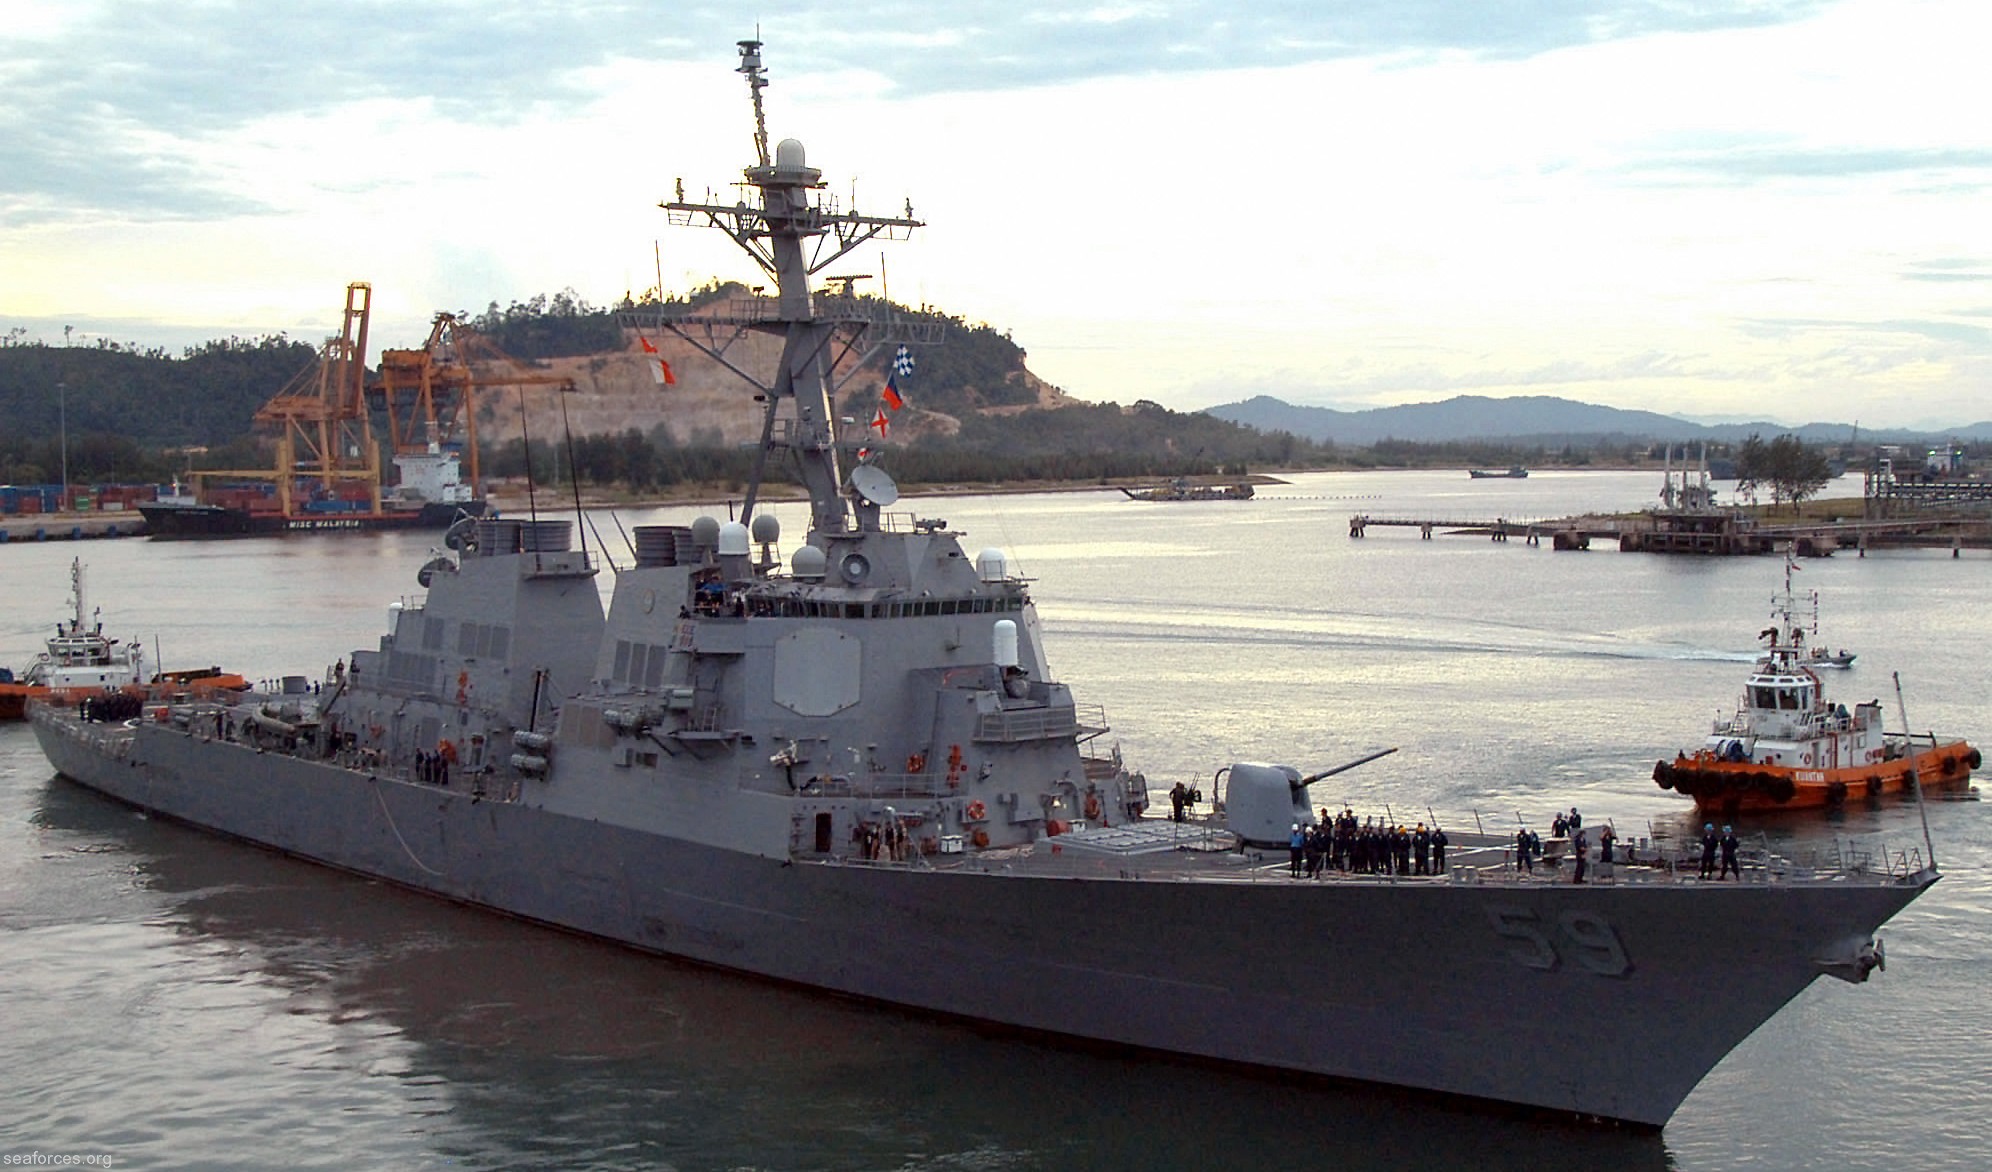 ddg-59 uss russell guided missile destroyer us navy 46 kuantan malaysia